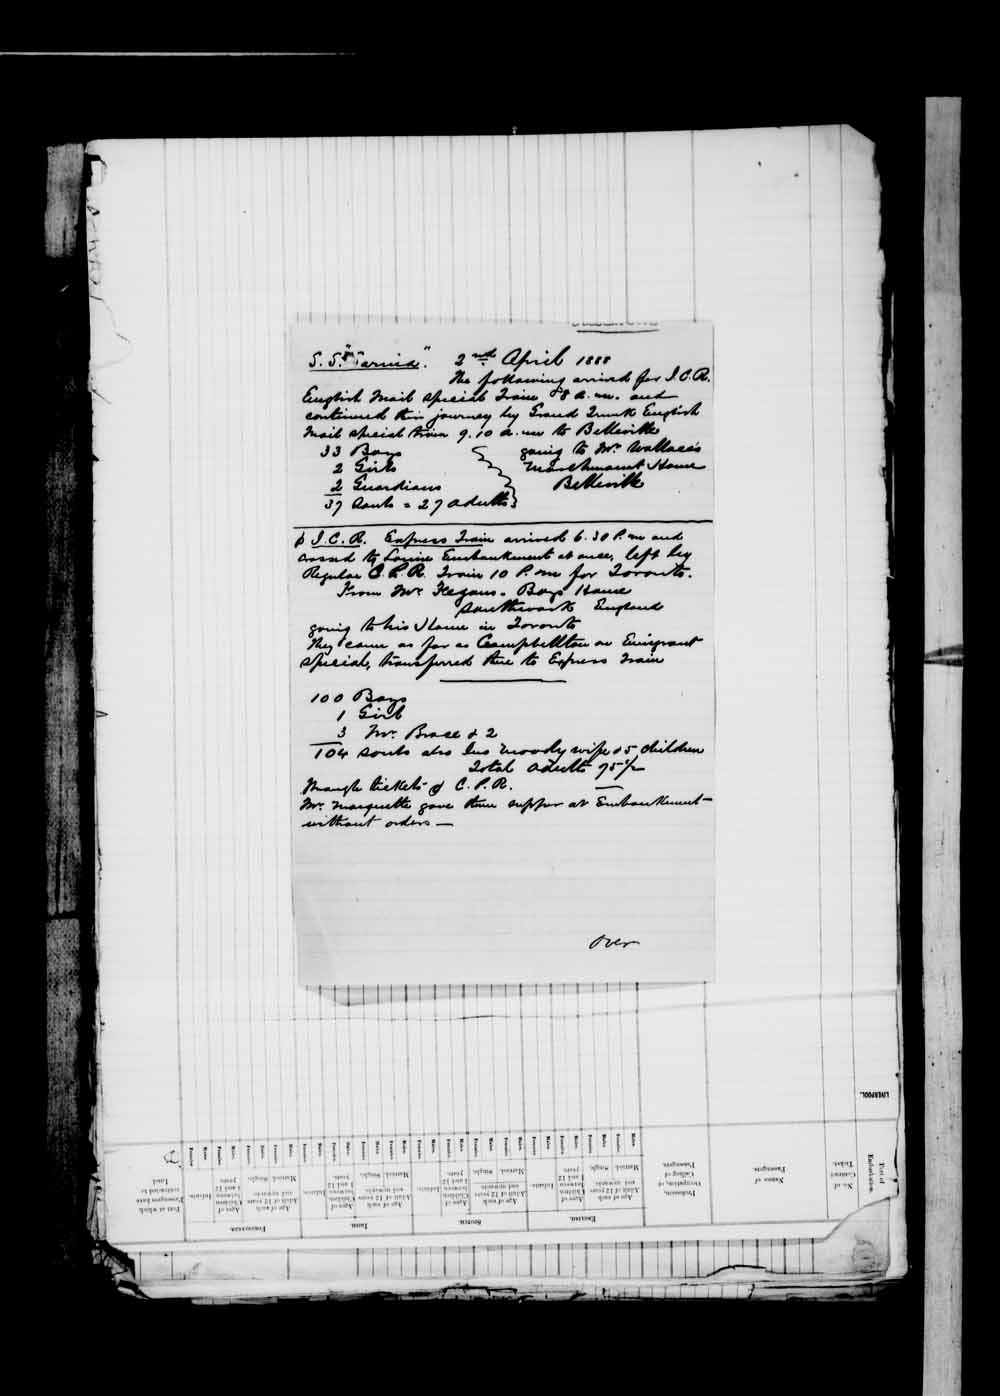 Digitized page of Passenger Lists for Image No.: e003674506